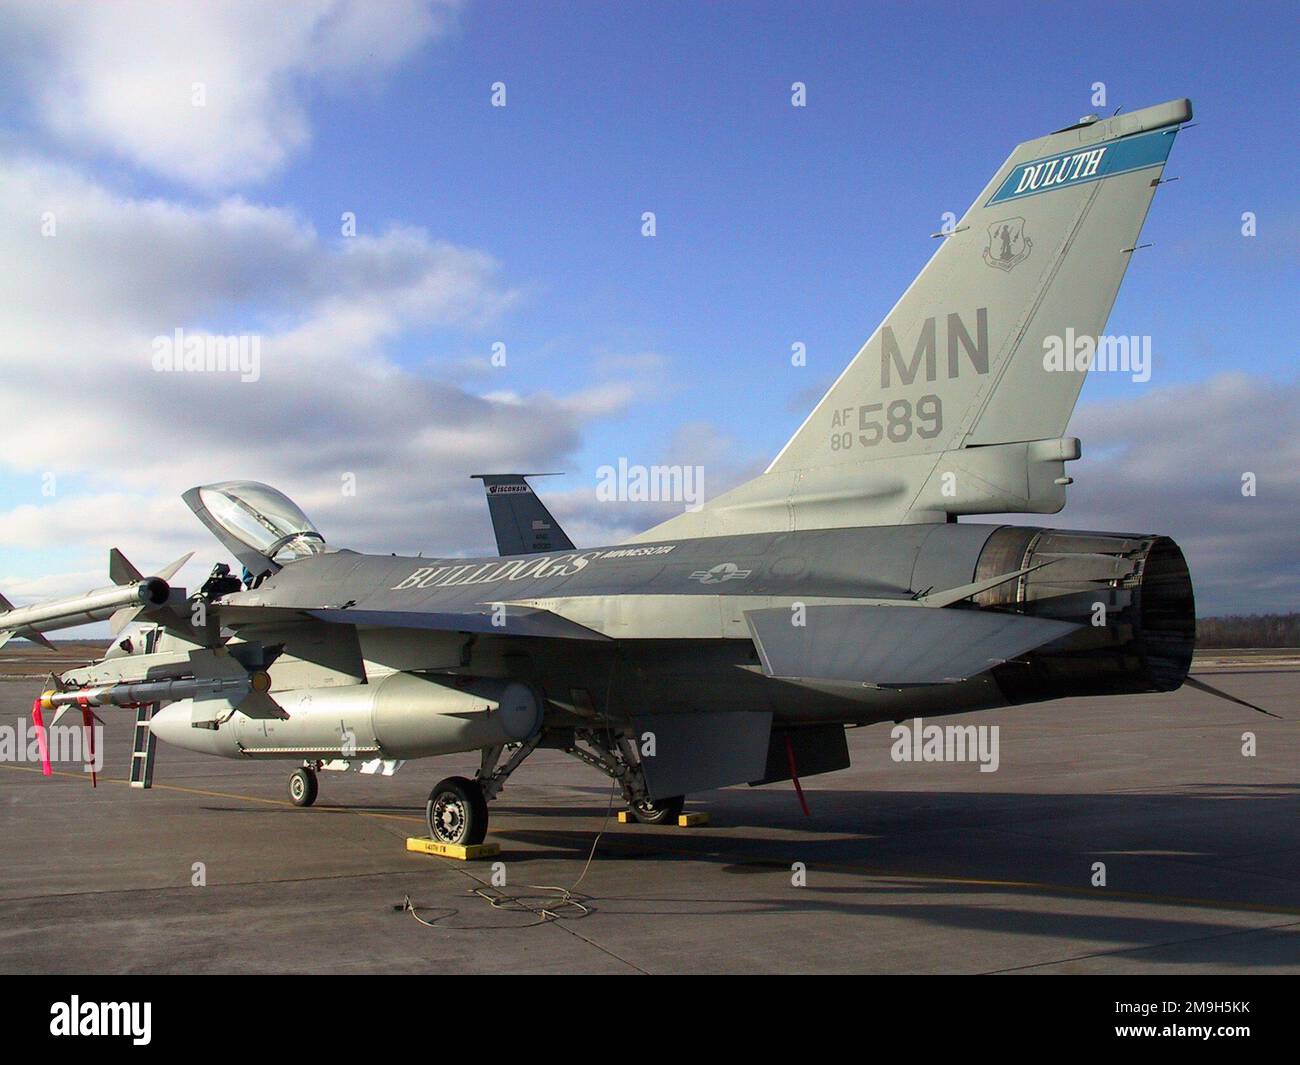 011211-F-4006S-007. Subject Operation/Series: NOBLE EAGLE 2001 Base: Duluth State: Minnesota (MN) Country: United States Of America (USA) Scene Major Command Shown: ANG Stock Photo